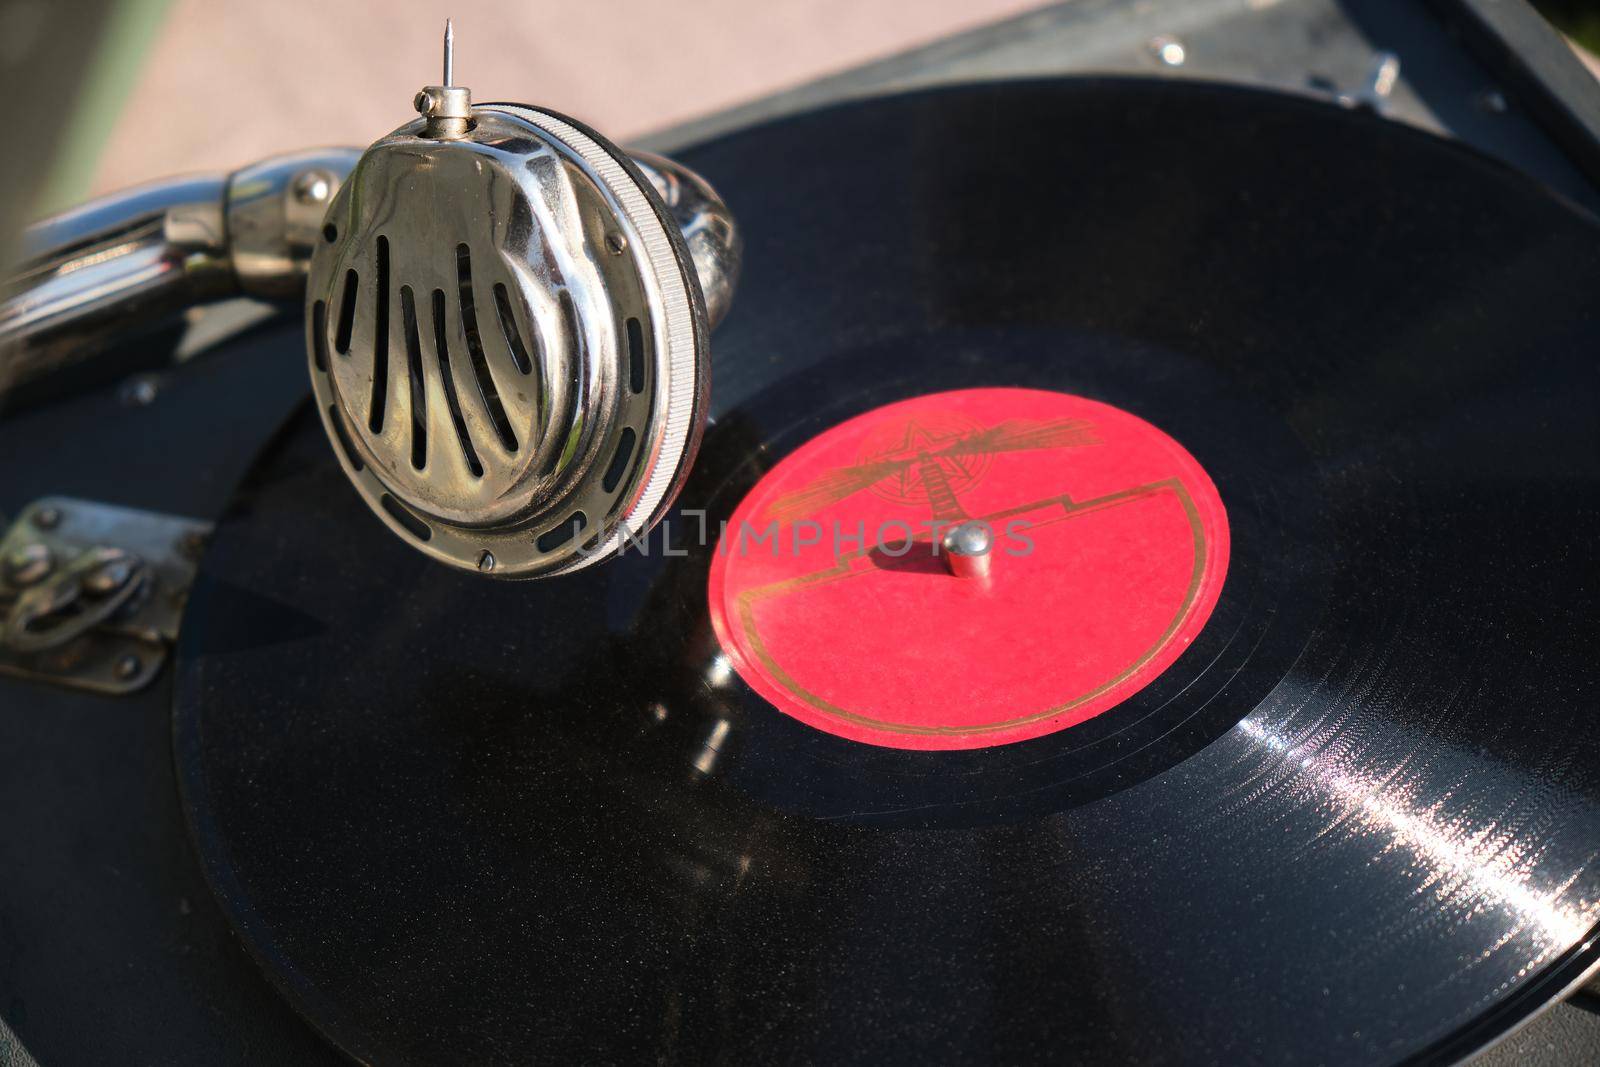 Detail of an old gramophone playing an original vinyl record.